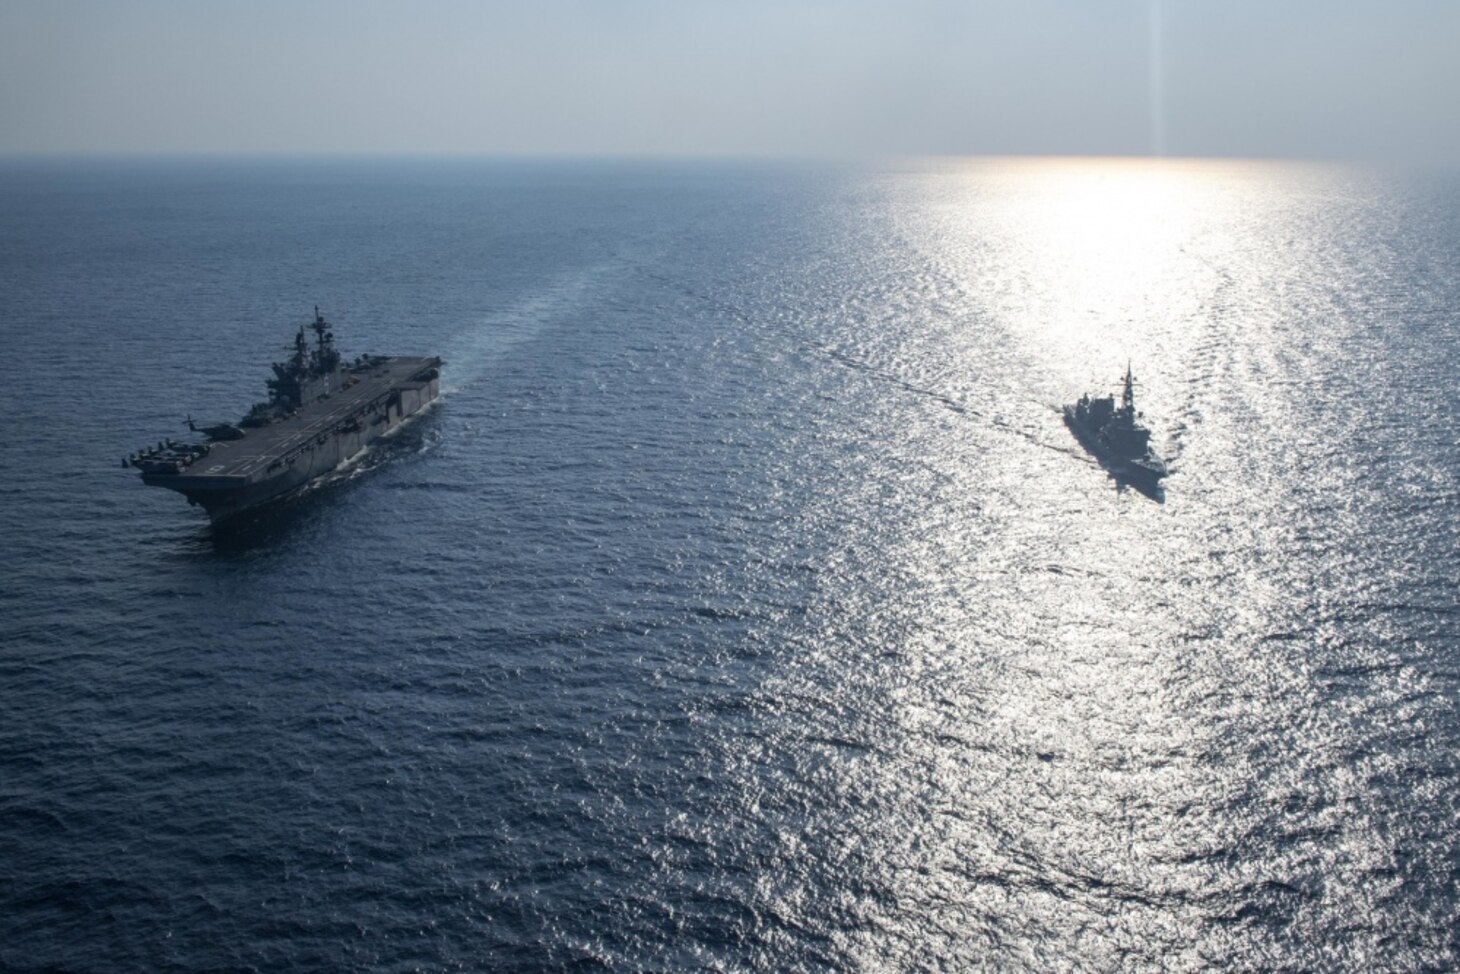 Amphibious assault ship USS America (LHA 6), left, sails with Japanese Maritime Self-Defense Force destroyer JS Akebono (DD 108). America, flagship of the America Expeditionary Strike Group, 31st Marine Expeditionary Unit team, is operating in the U.S. 7th Fleet area of operations to enhance interoperability with allies and partners and serve as a ready response force to defend peace and stability in the Indo-Pacific region.